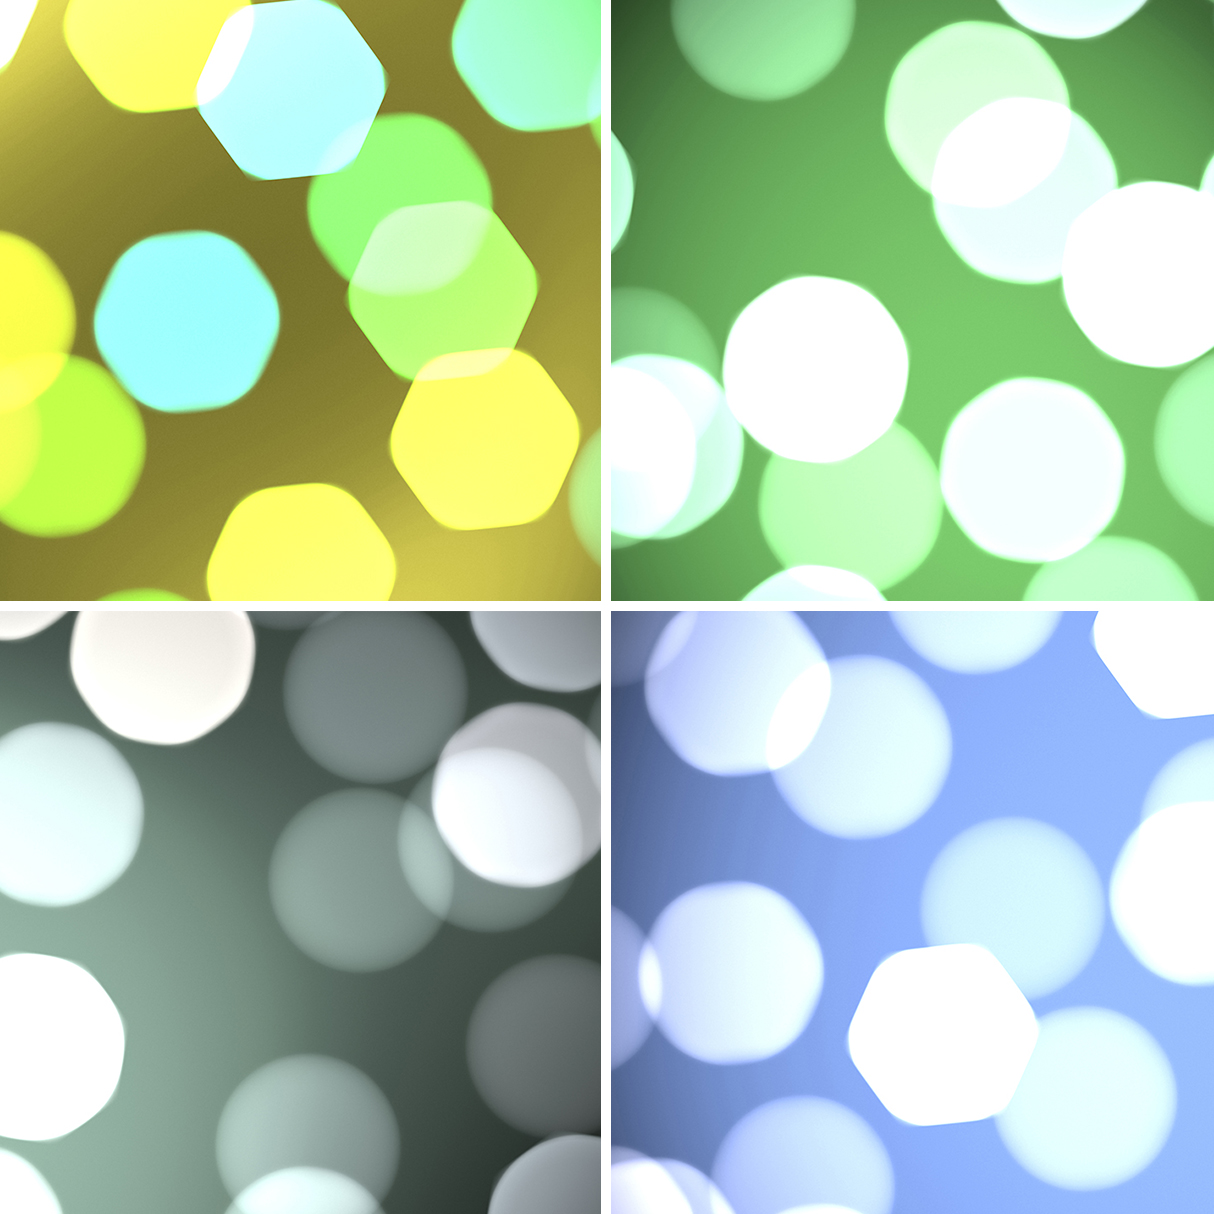 50 Bokeh Pro Backgrounds Samples Preview – Part 10